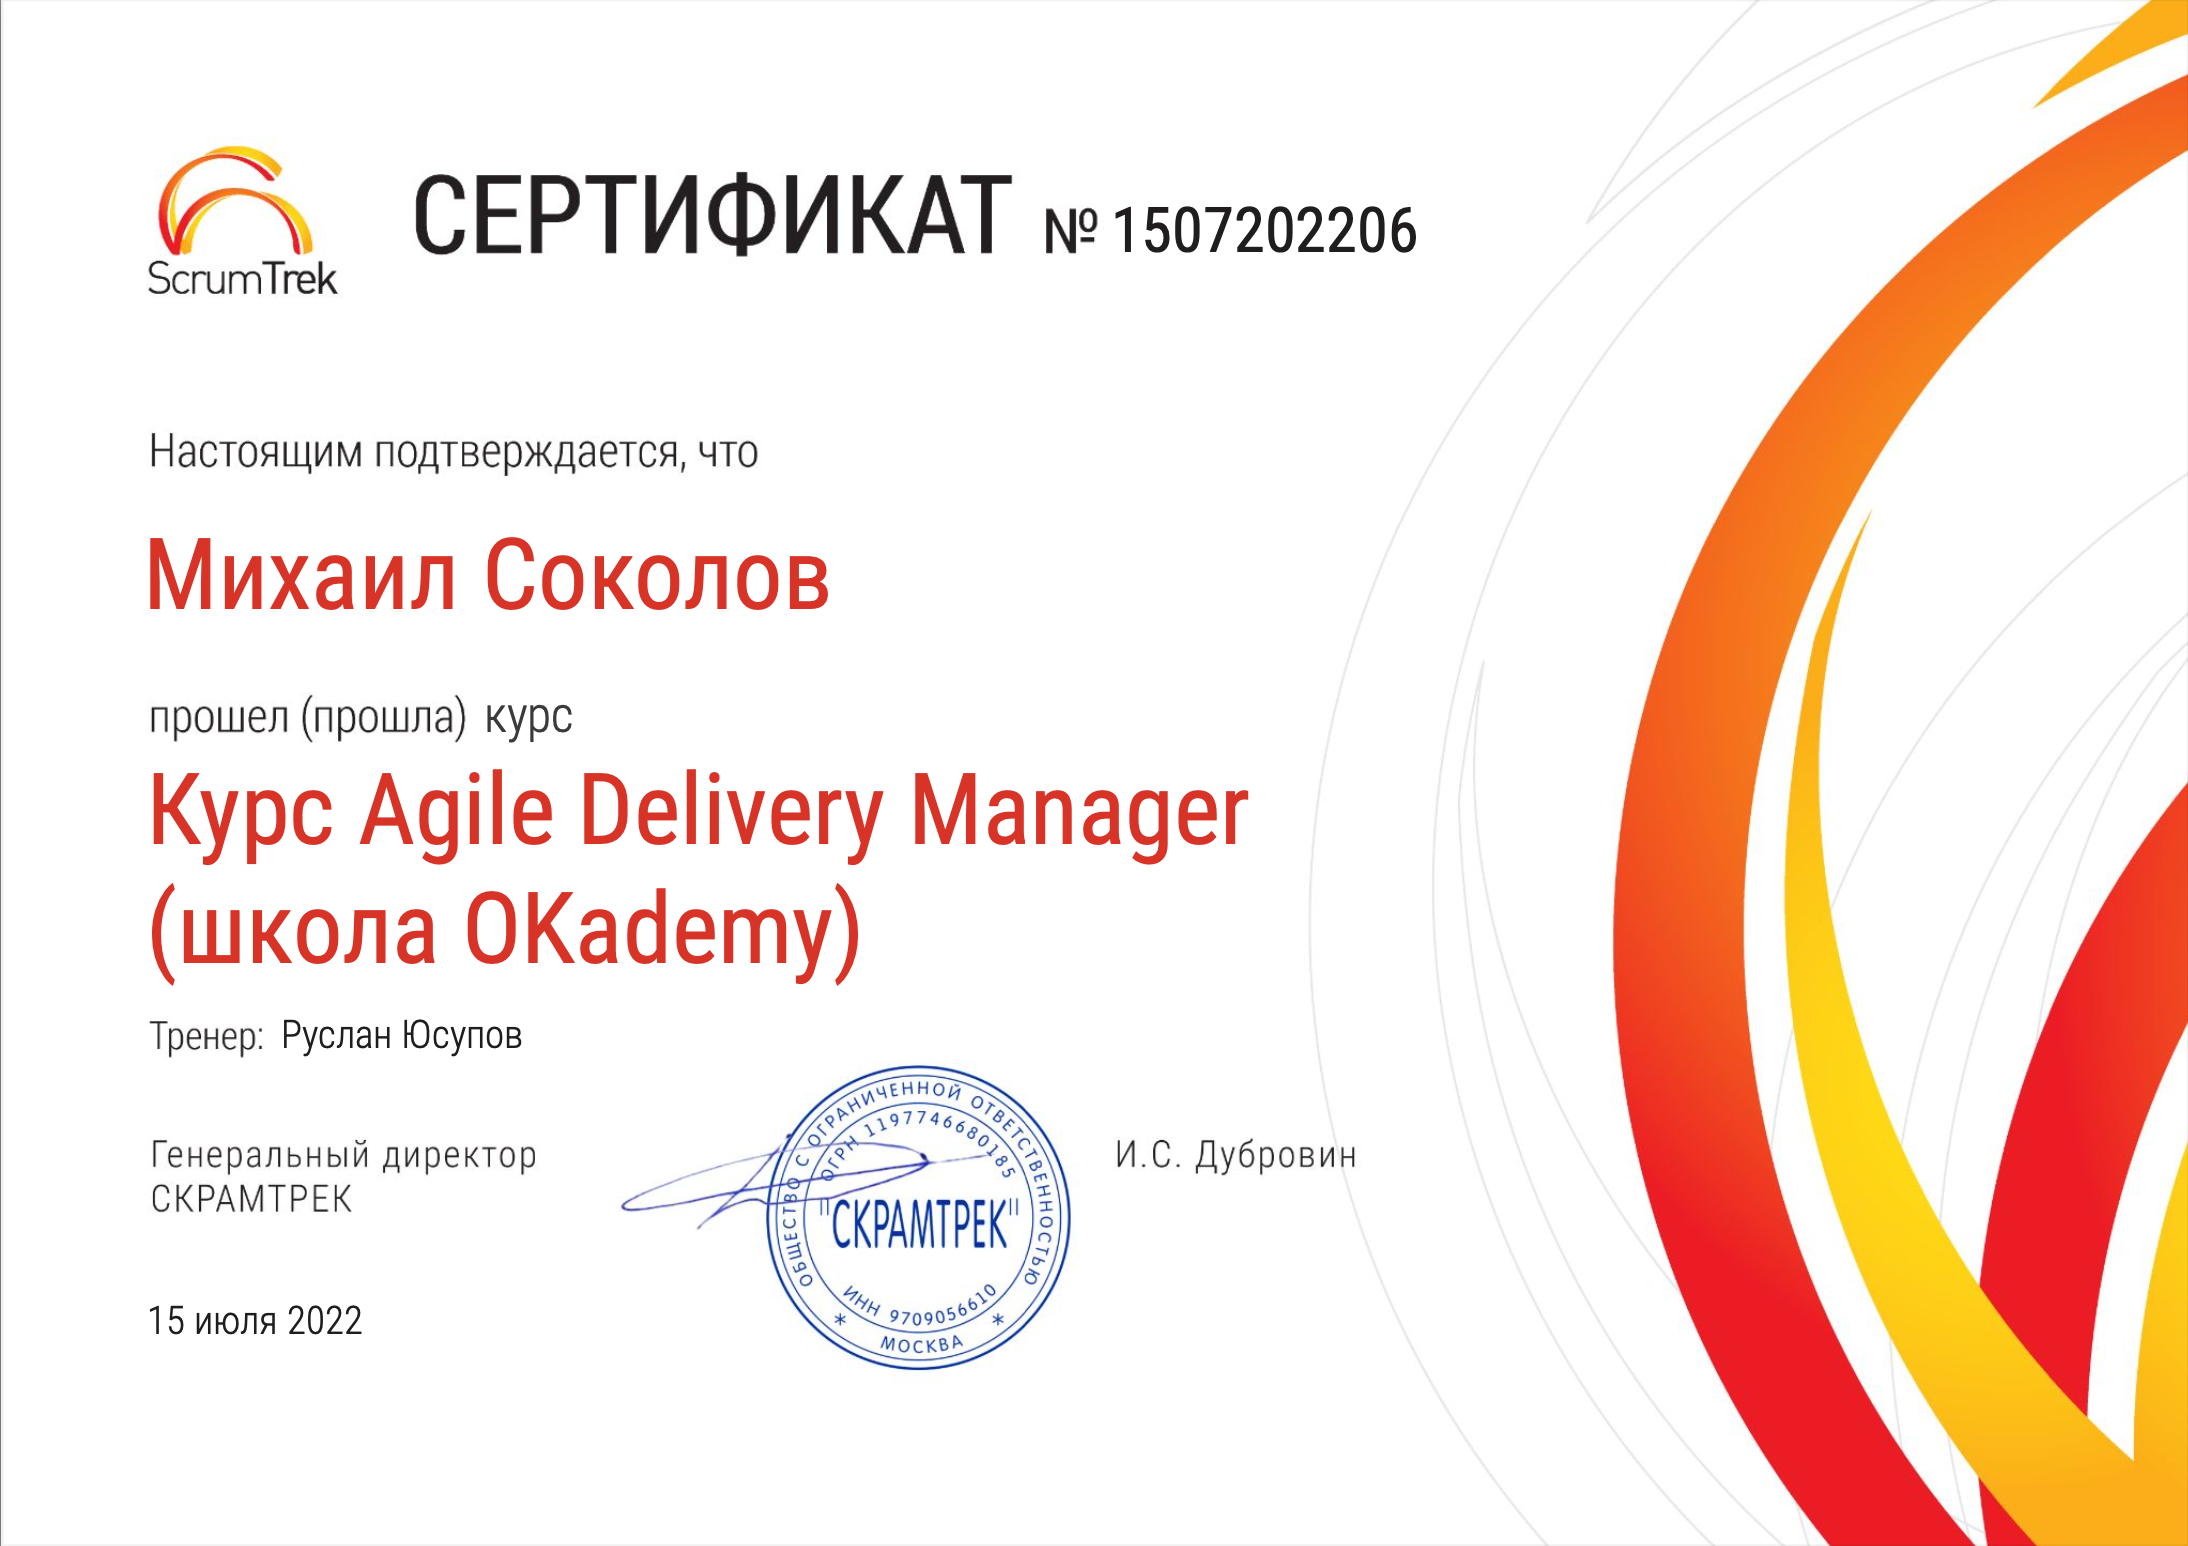 agile delivery manager 2022 Михаил Соколов